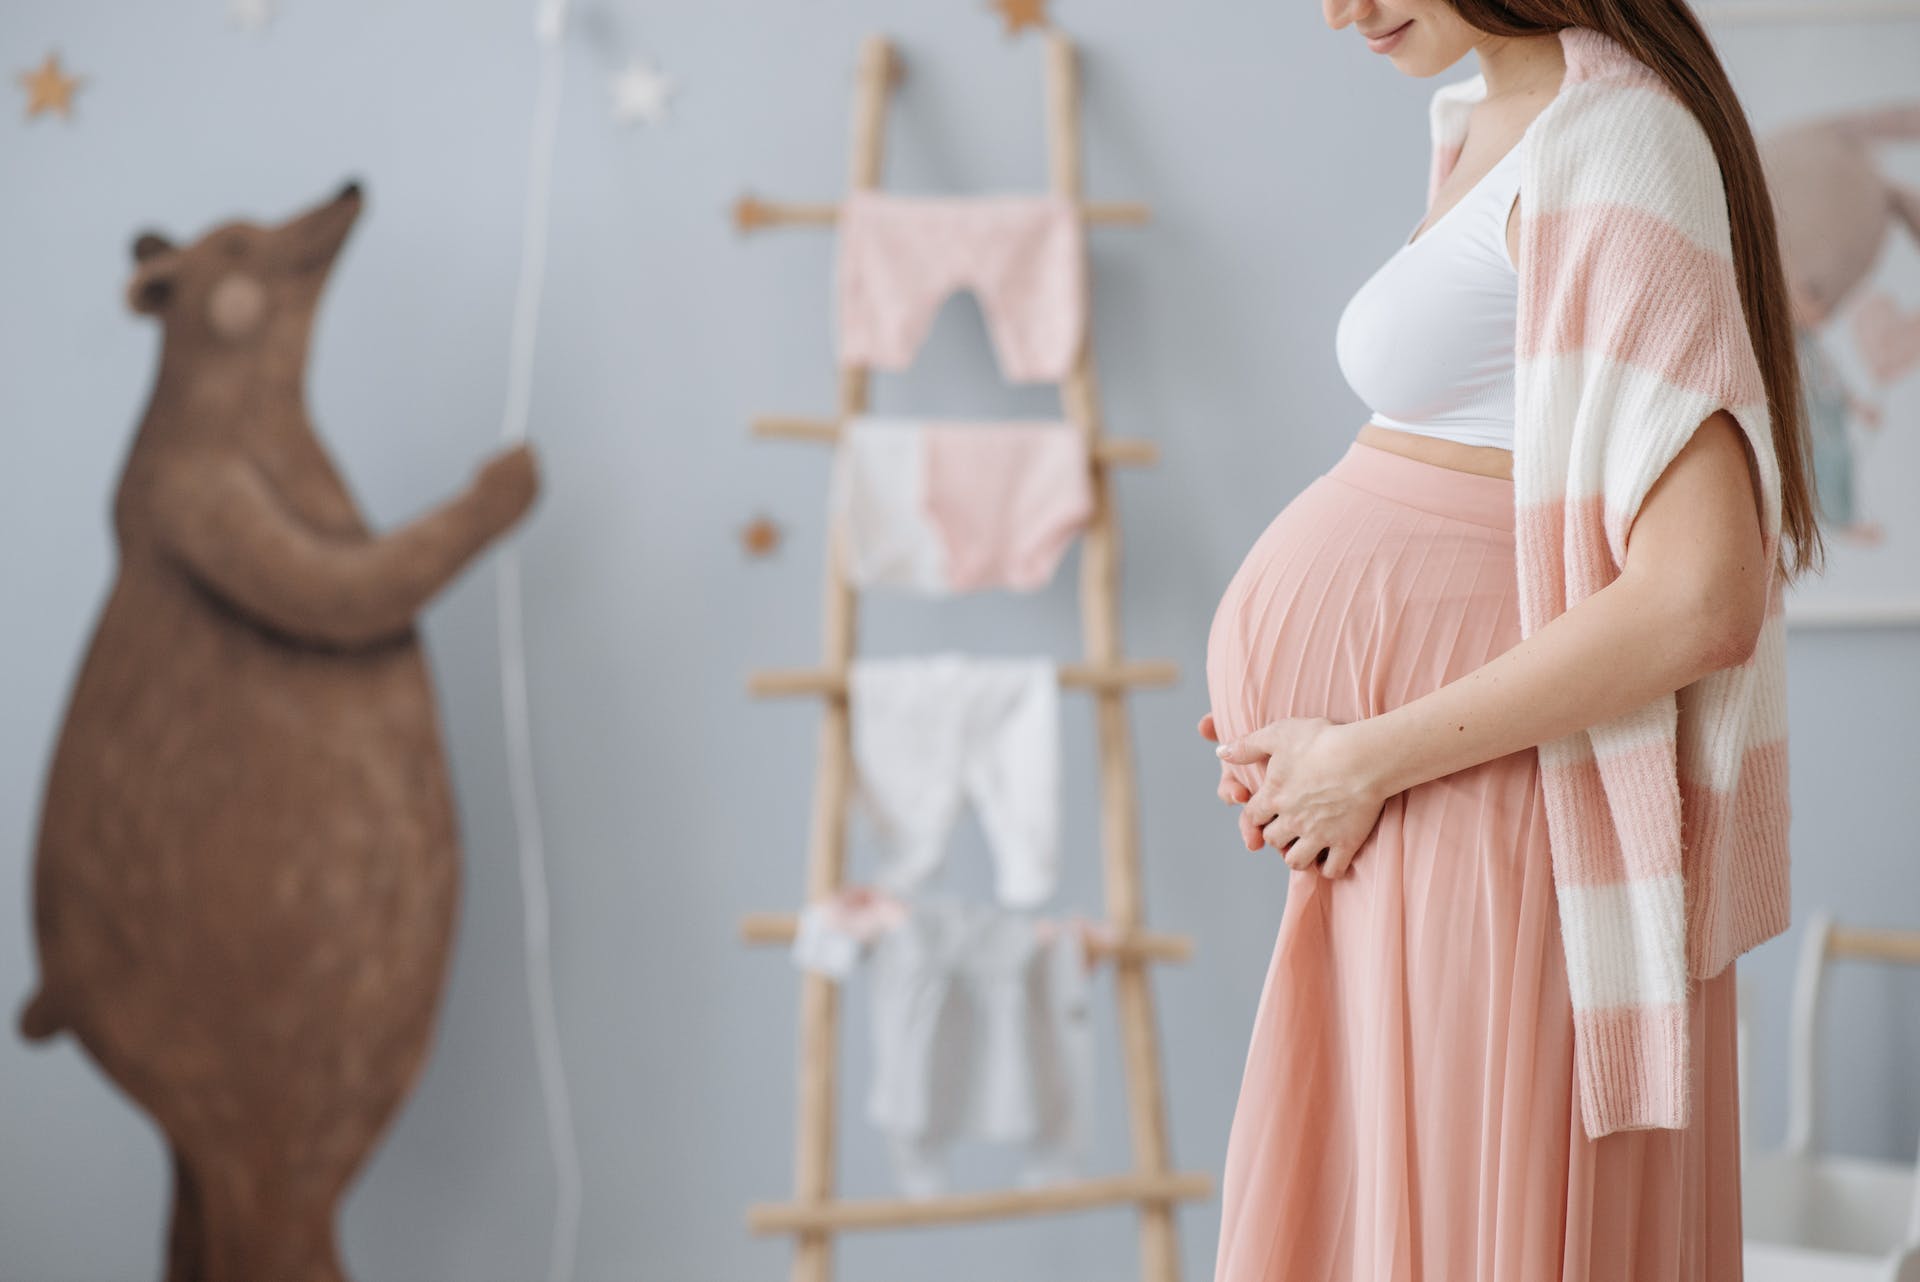 A pregnant woman holding her belly while in a baby's nursery | Source: Pexels